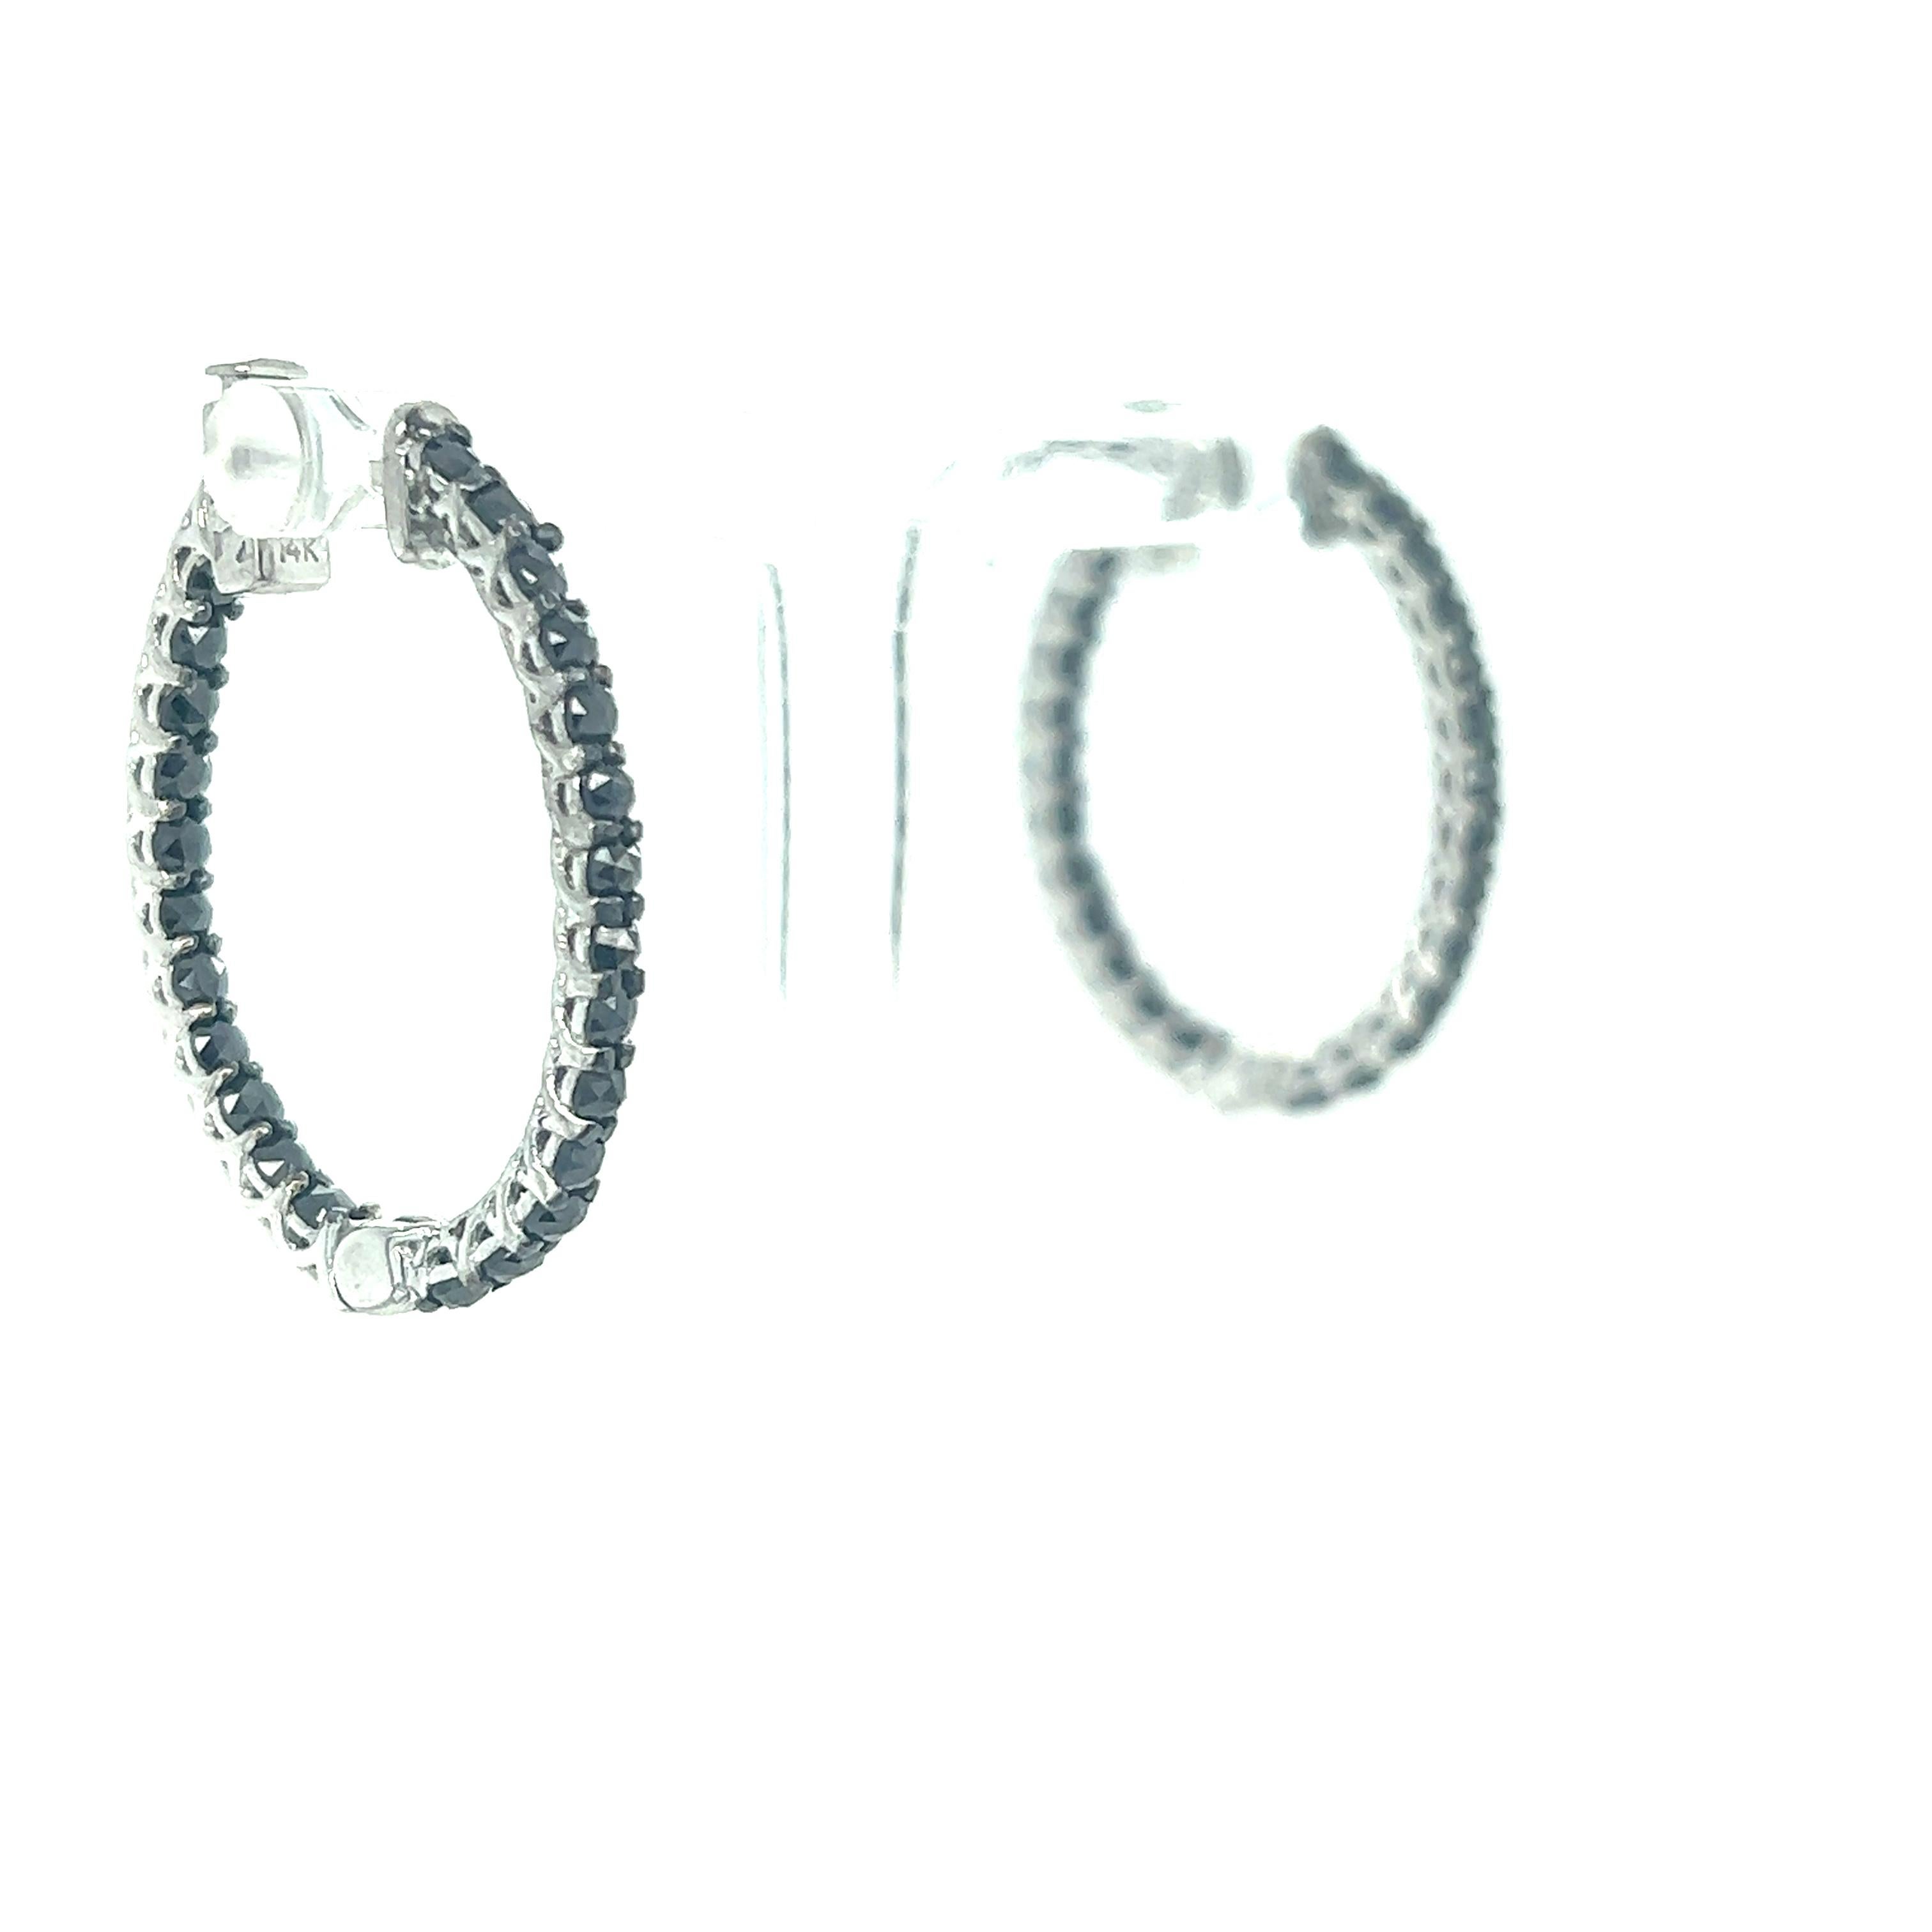 These hoop earrings have Natural Round Cut Black Diamonds that weigh 2.00 carats. 

They are set in 14 Karat White Gold and have an approximate gold weight of 7.0 grams.

The hoops are 2.5 cm wide and 3 cm long. 